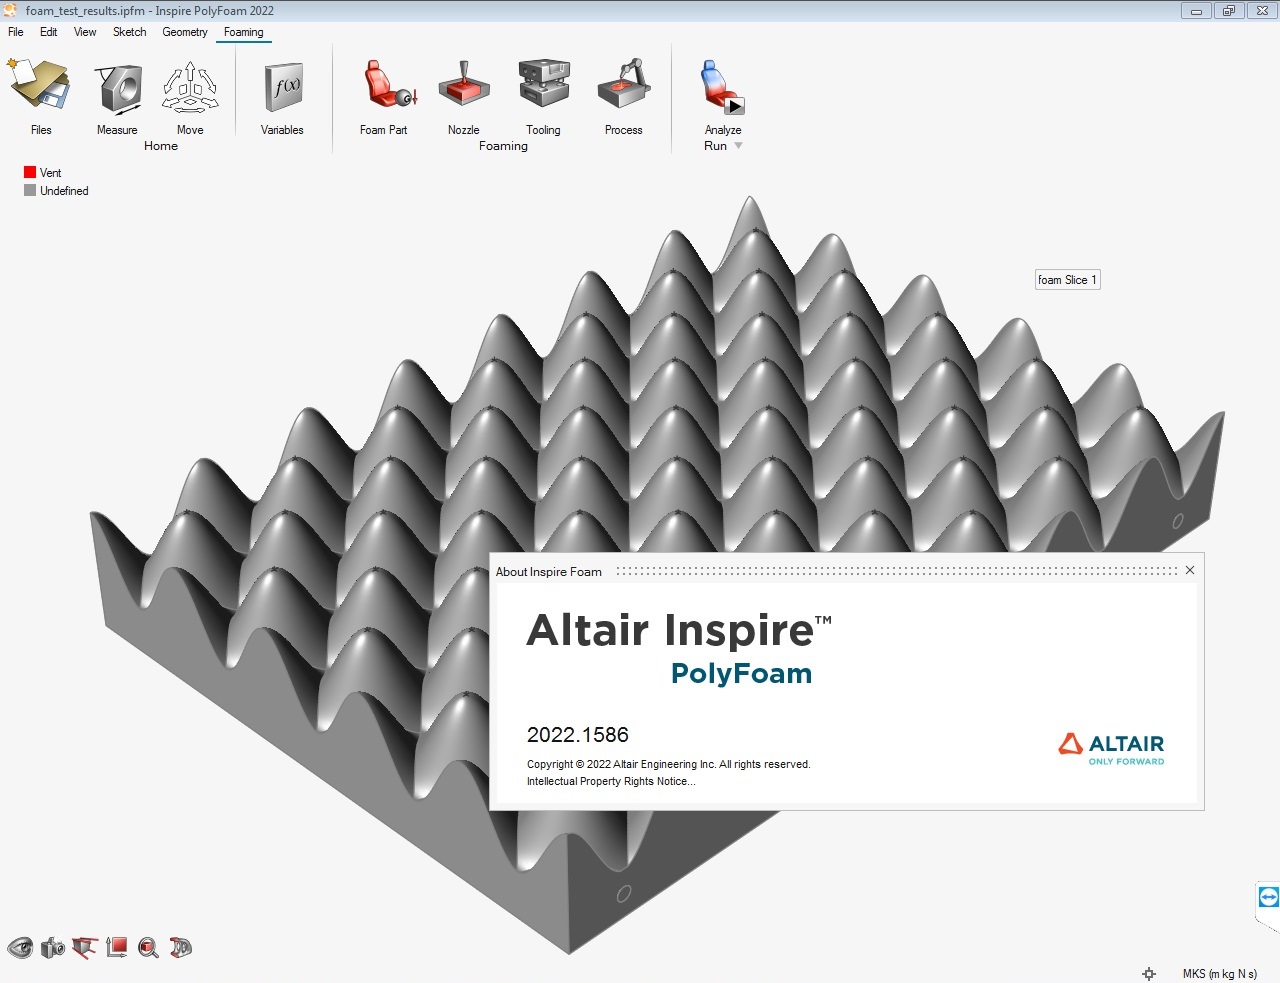 Working with Altair Inspire PolyFoam 2022.0 full